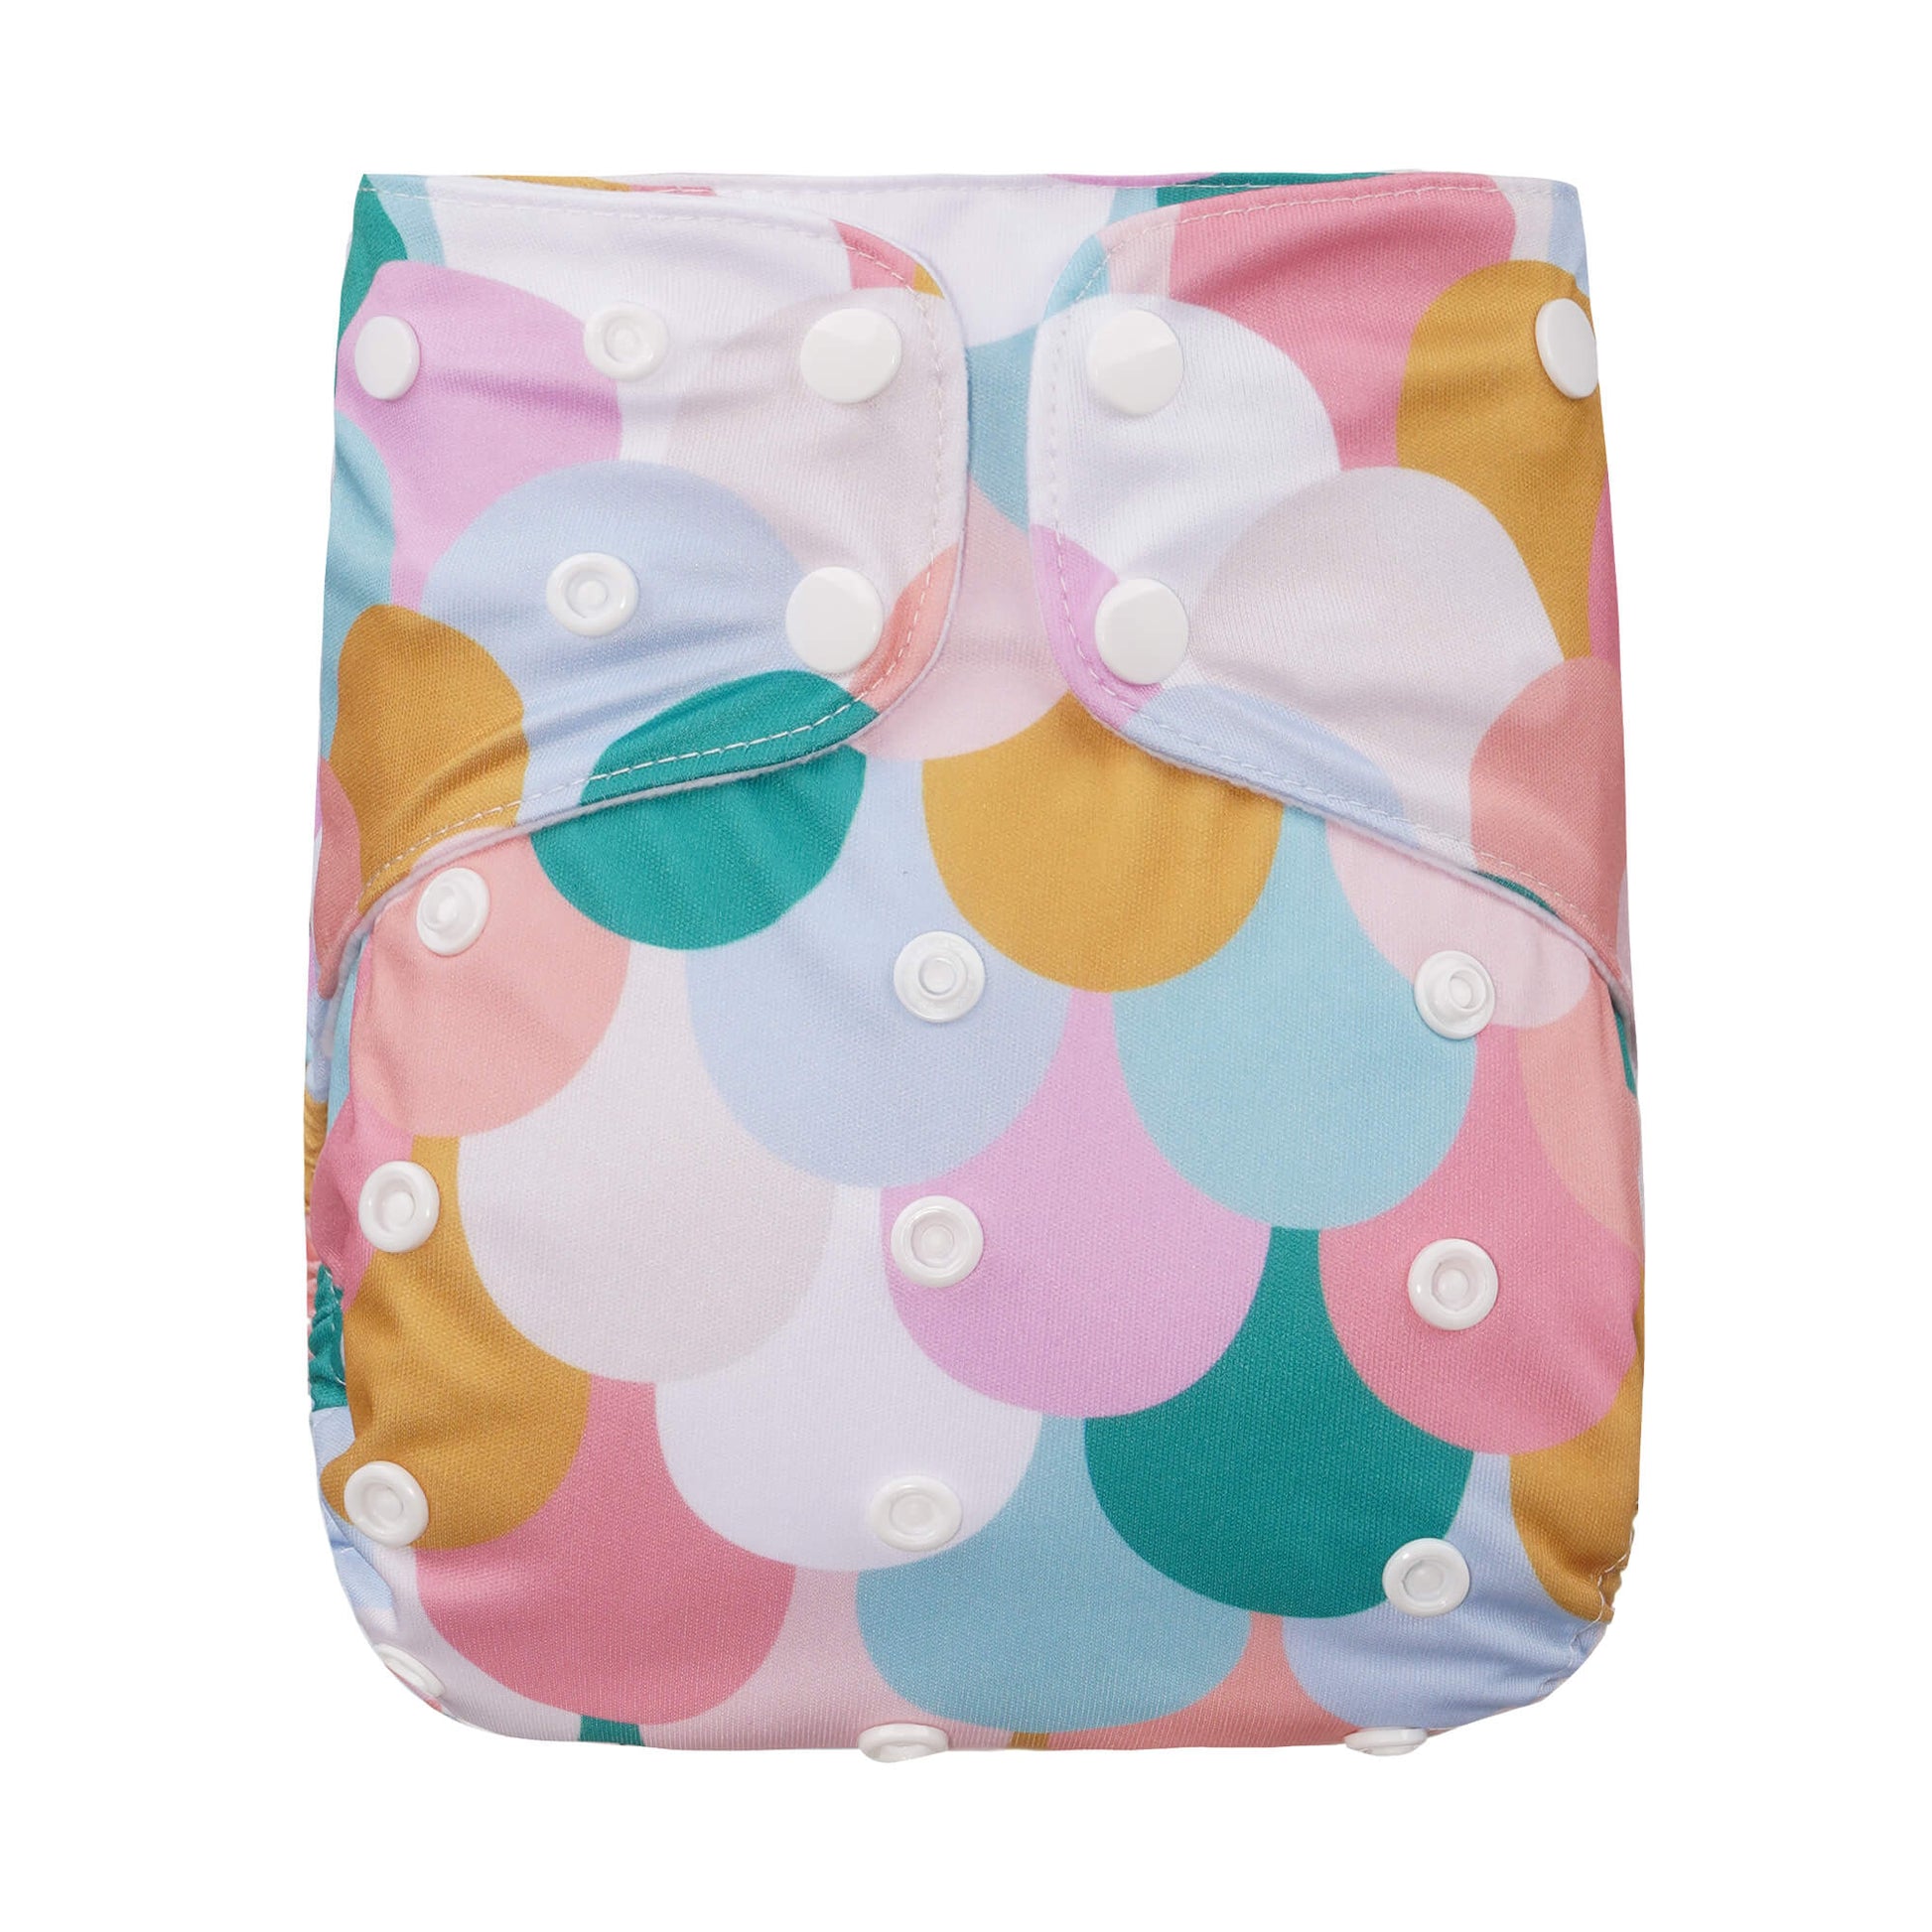 Large Reusable Cloth Nappy by Bear & Moo in Mermaid Scales print